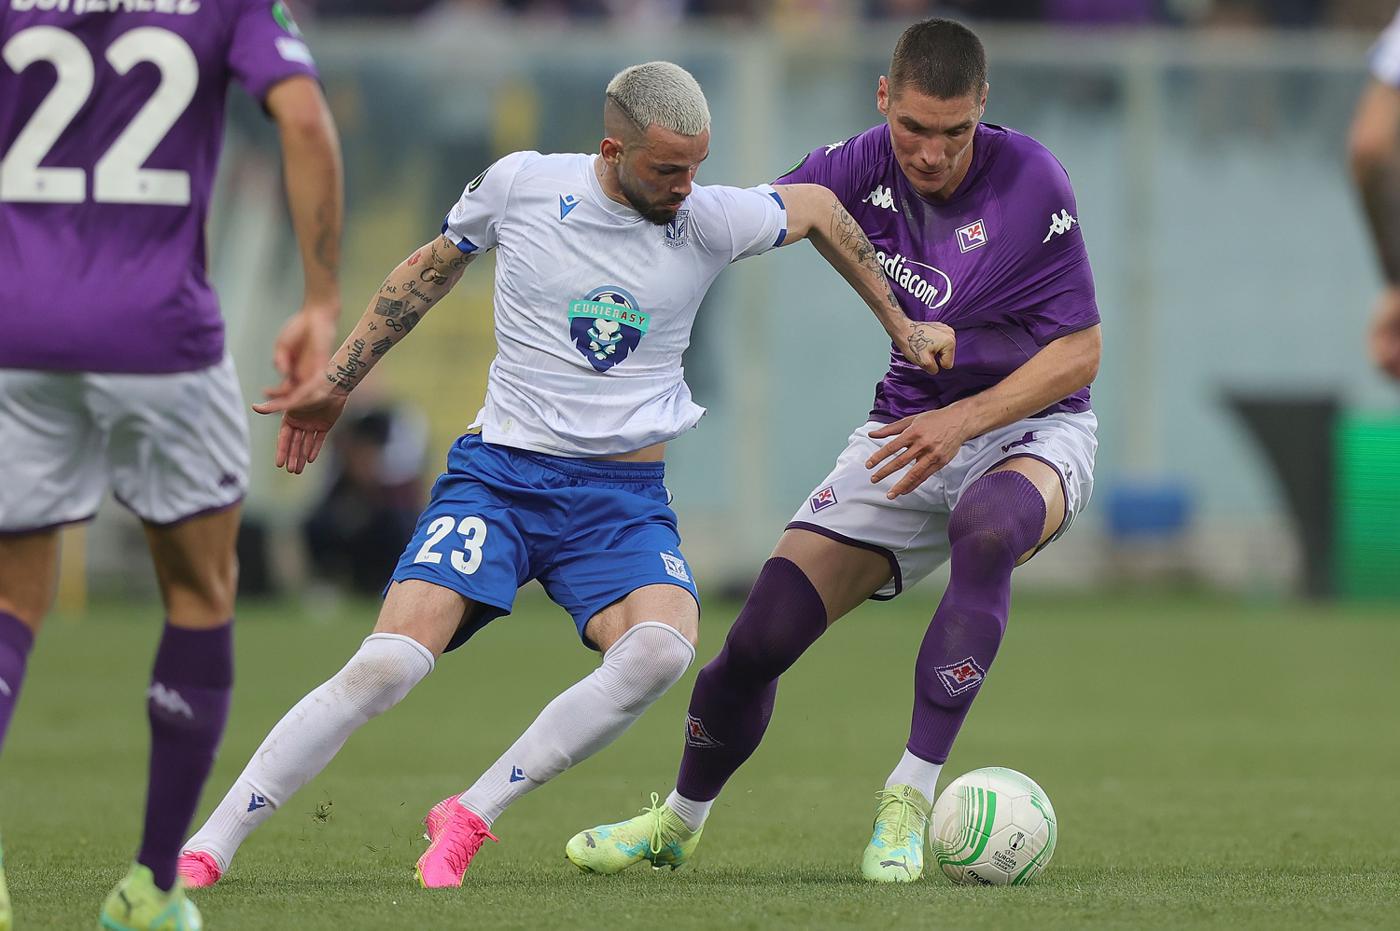 Fiorentina v Lech - 2:3. Conference League. Review of the match, statistics.